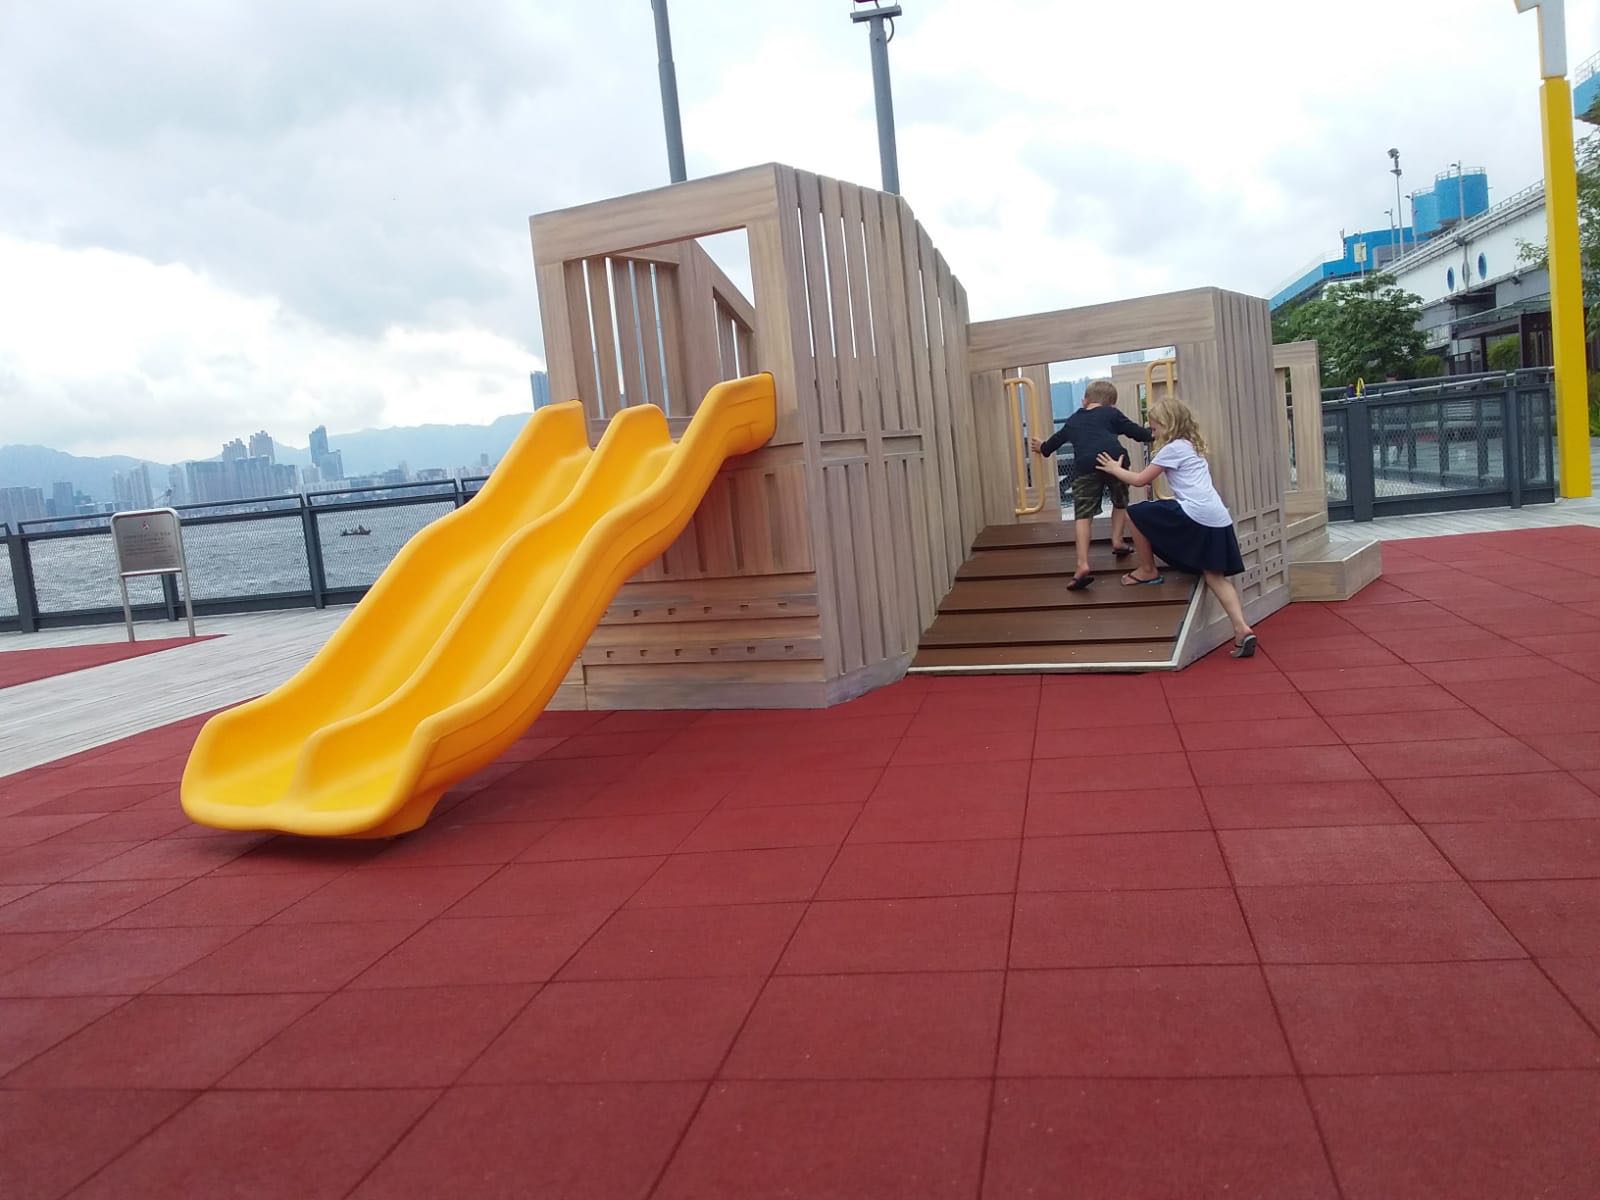 Pirate Ship Playground in Kennedy Town